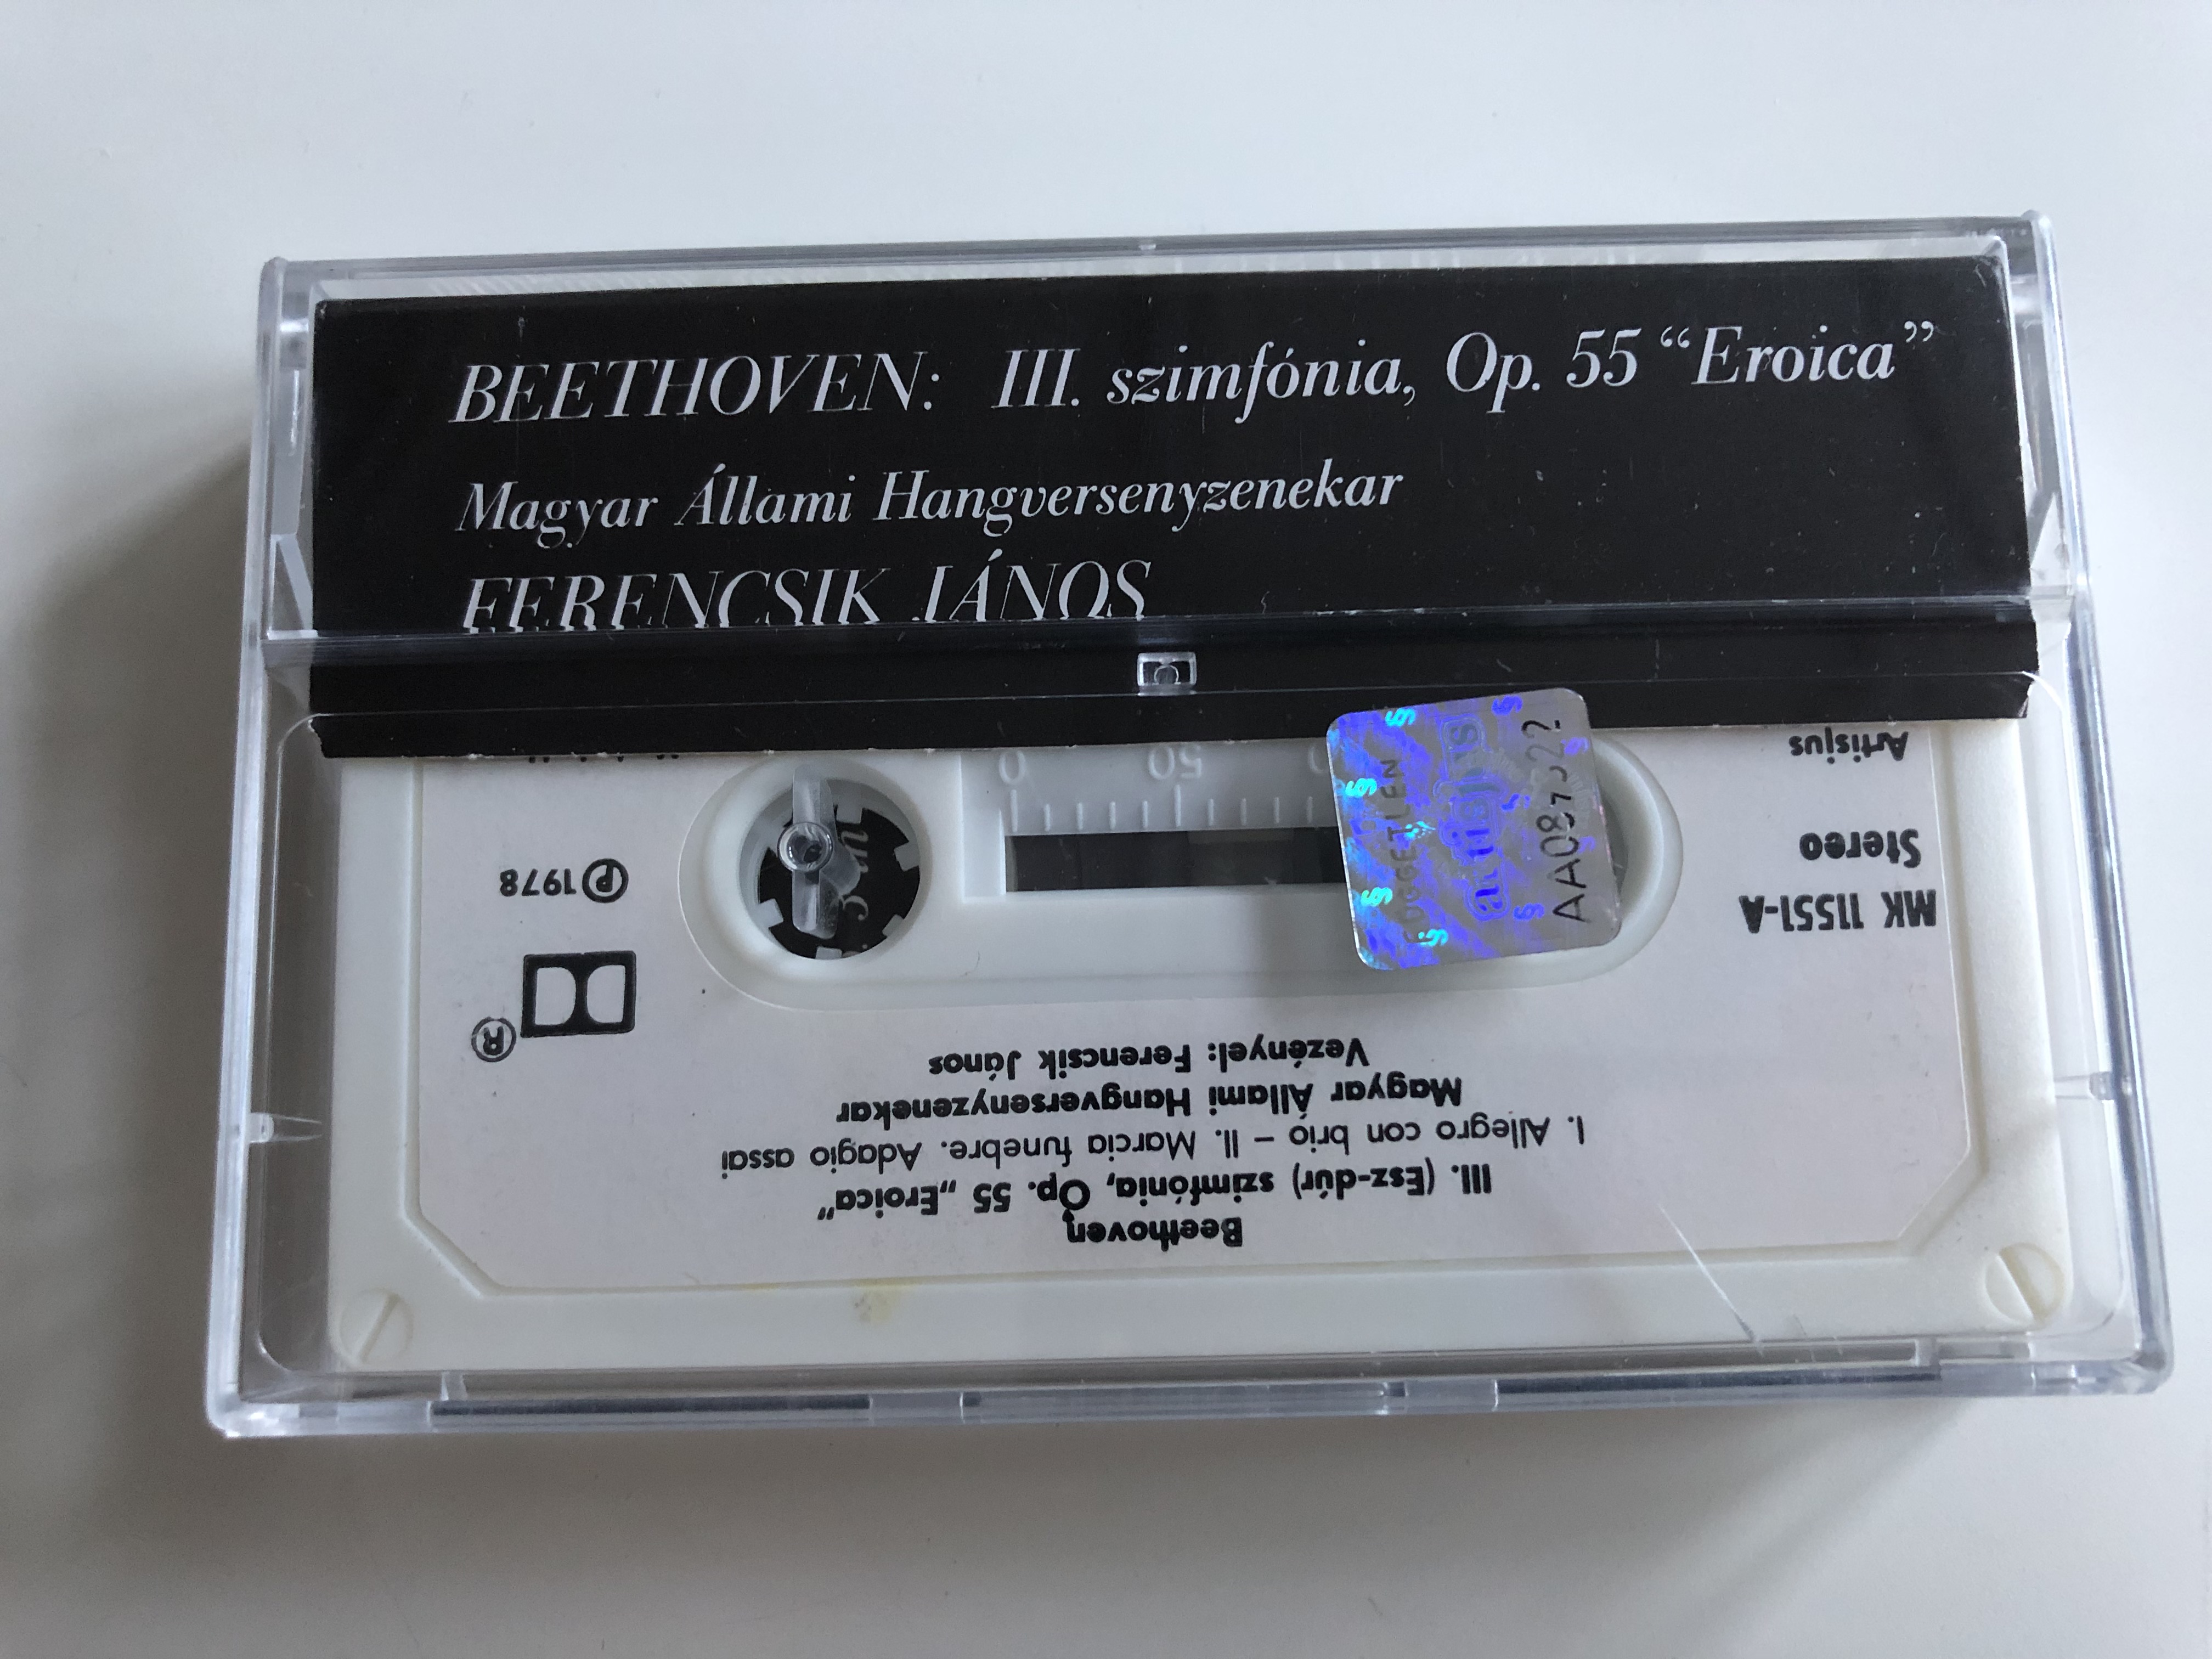 eroica-beethoven-hungarian-state-orchestra-conducted-j-nos-ferencsik-hungaroton-cassette-stereo-mk-11551-3-.jpg